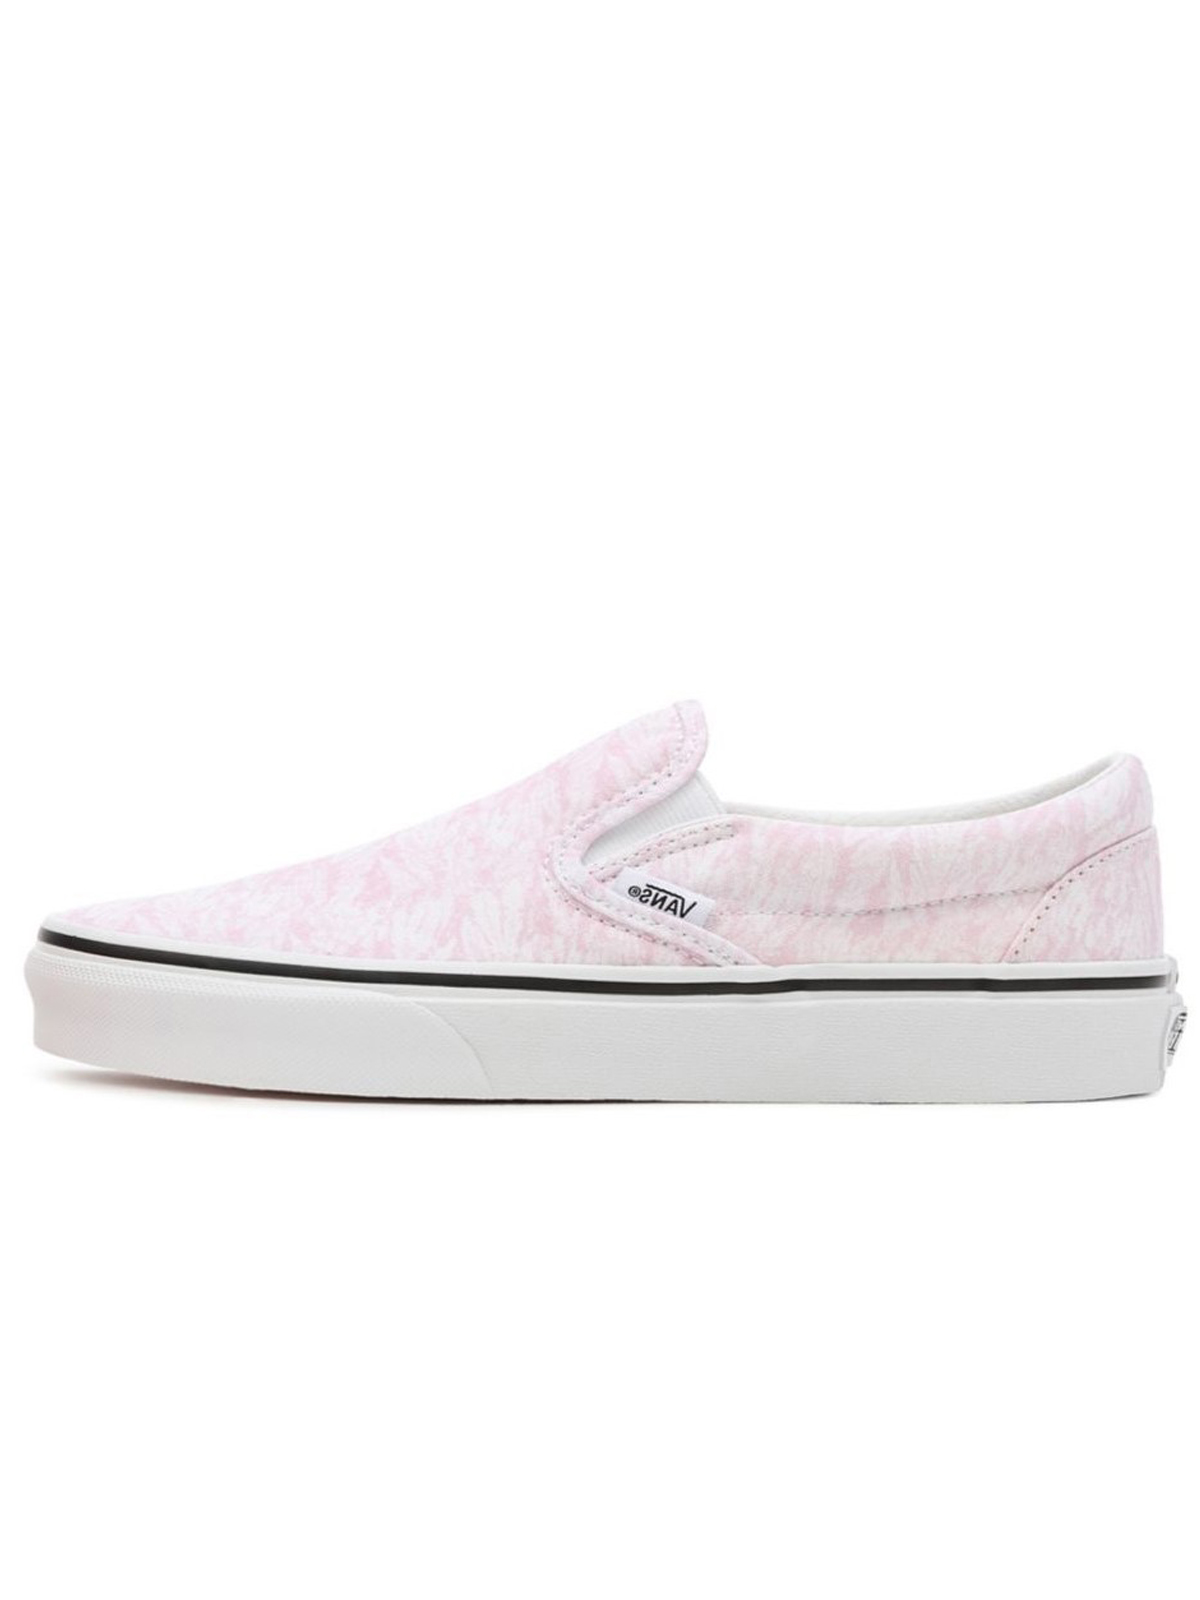   Vans | Slip On Washes Pink | Womens Shoes